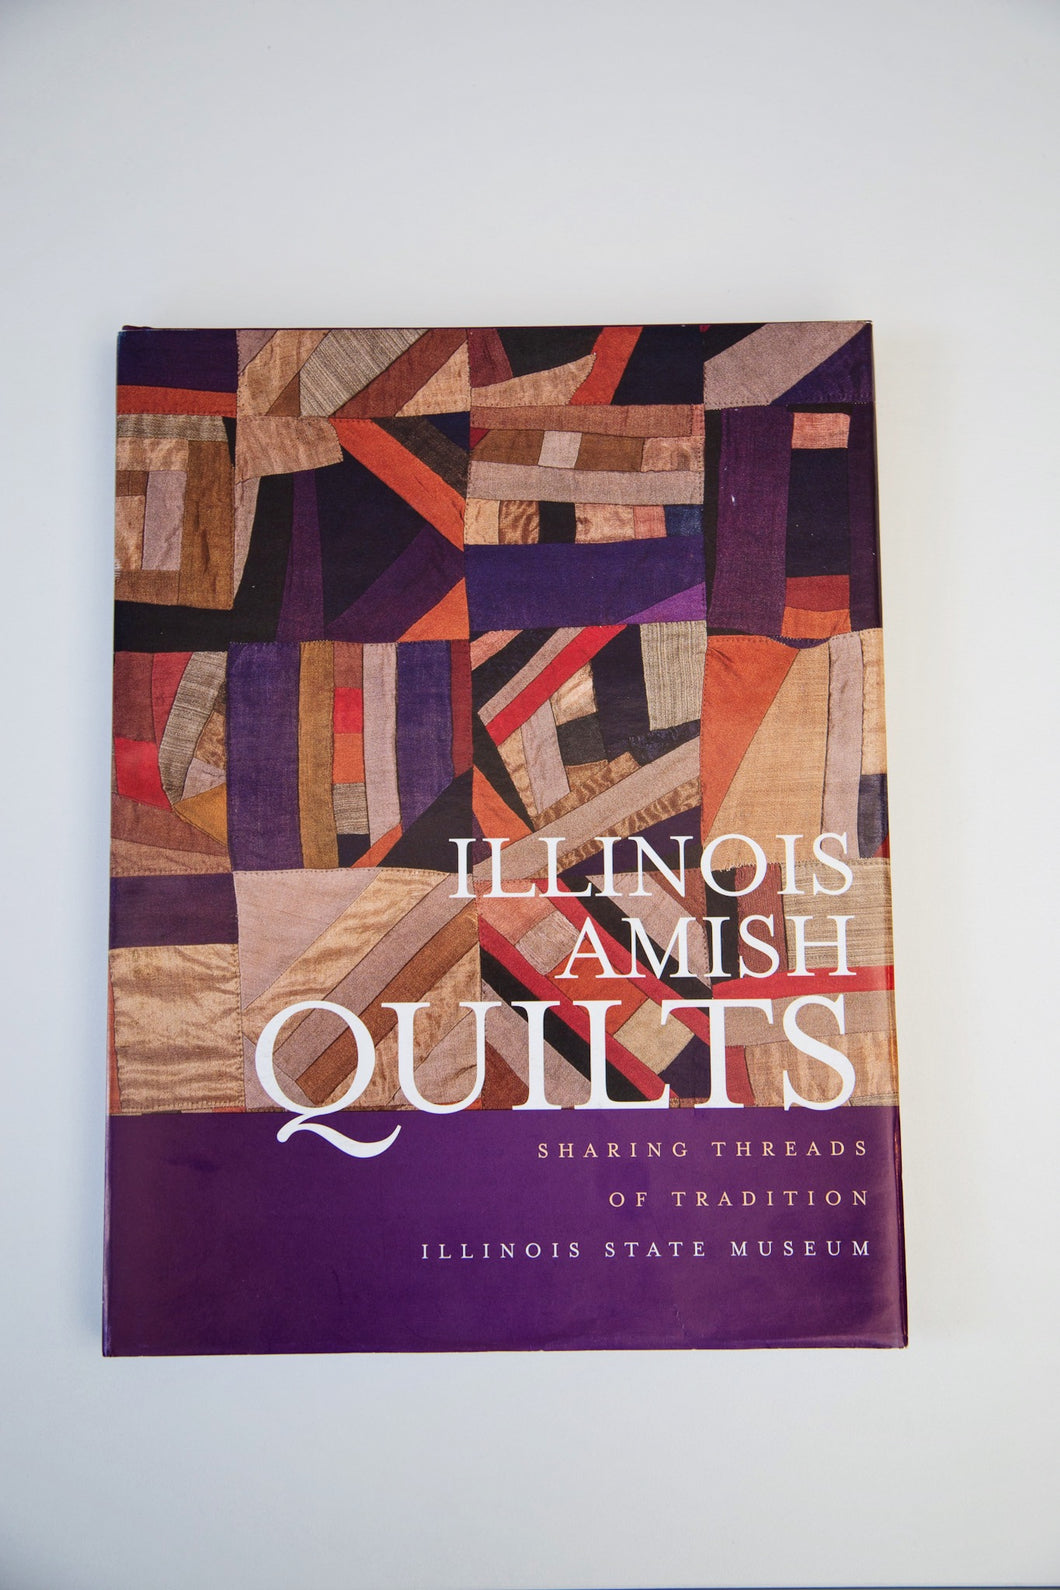 Image of the cover of the hard bound “Illinois Amish Quilts”.